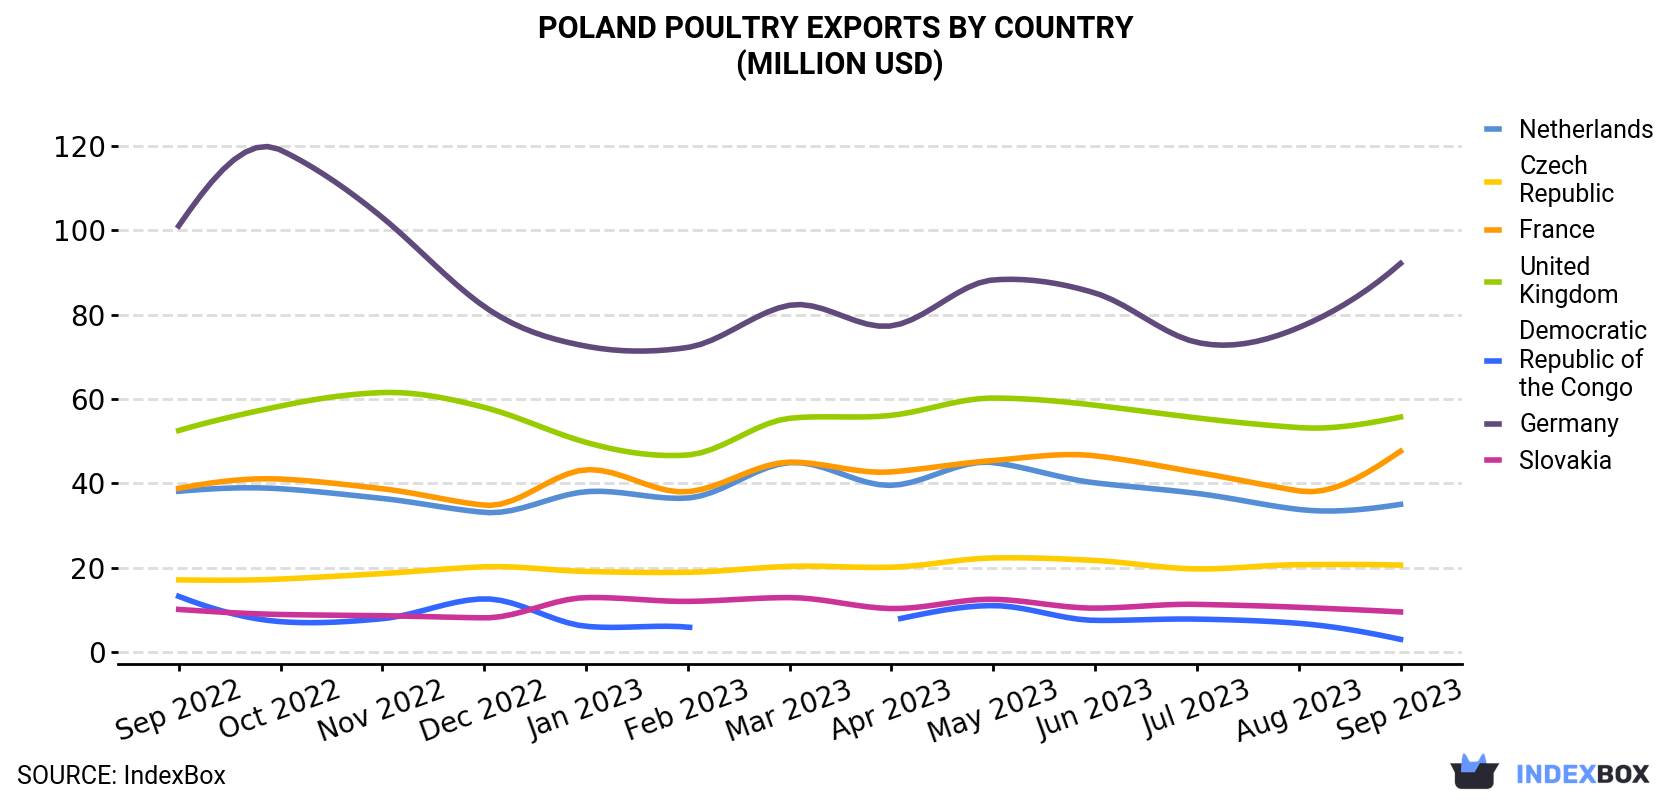 Poland Poultry Exports By Country (Million USD)